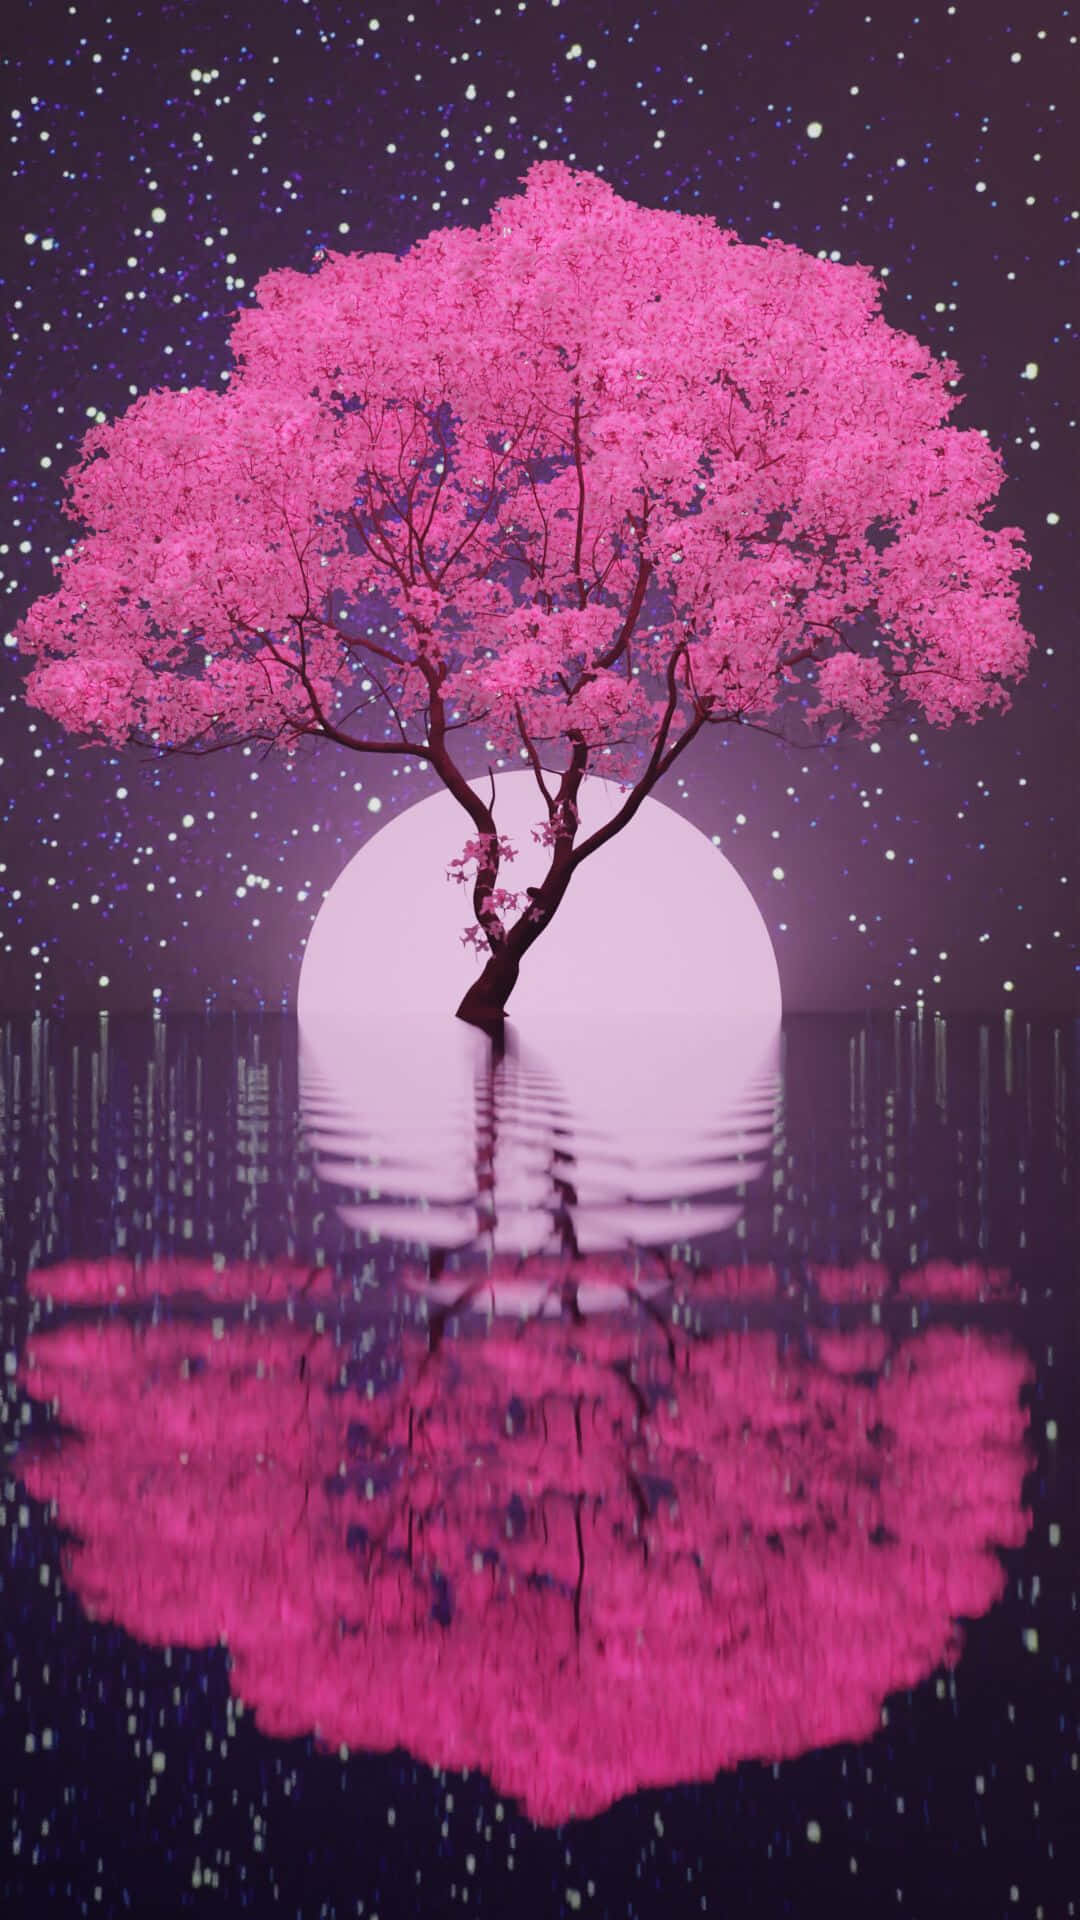 A Pink Tree In The Water With Stars In The Sky Wallpaper